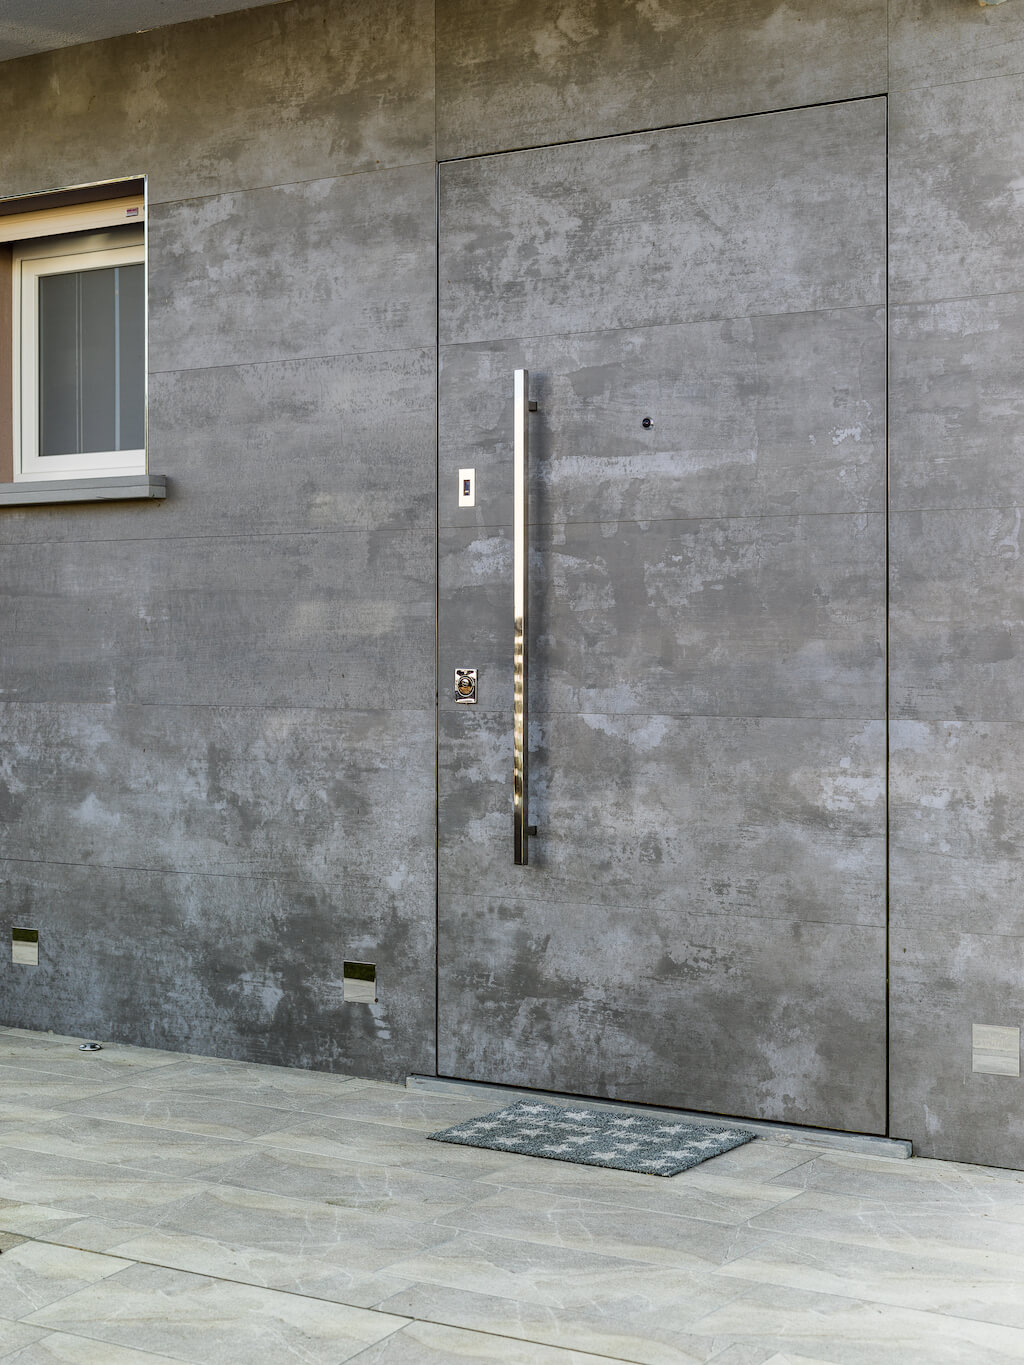 A photo of a front entry frameless door designed to match the exterior wall seamlessly.